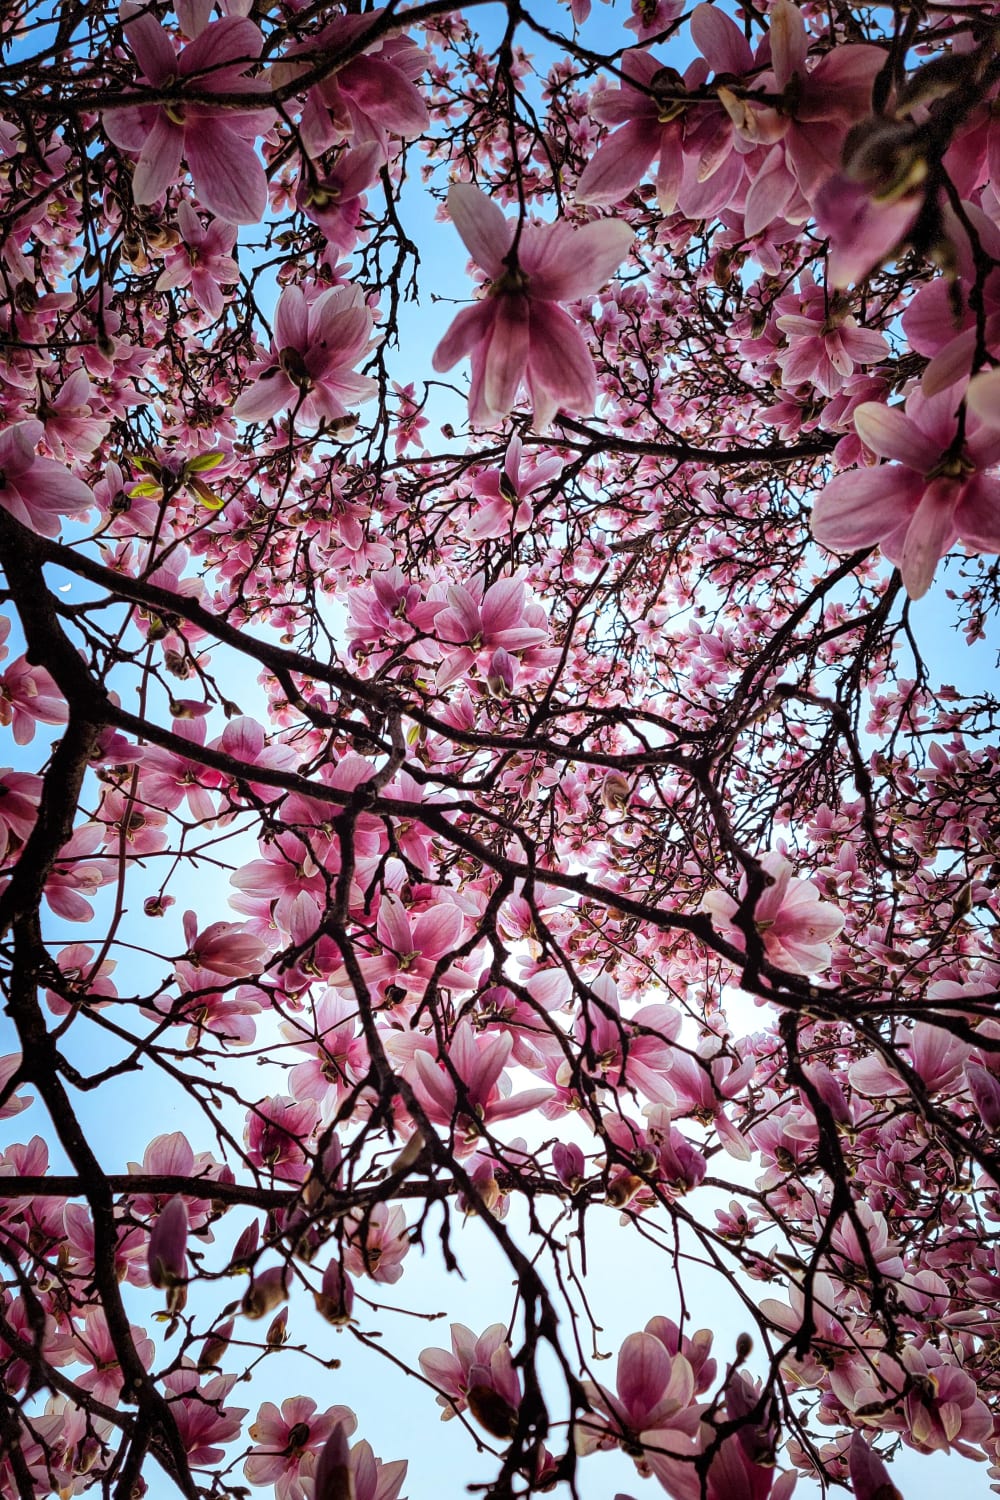 ITAP of a Magnolia Tree in West Michigan